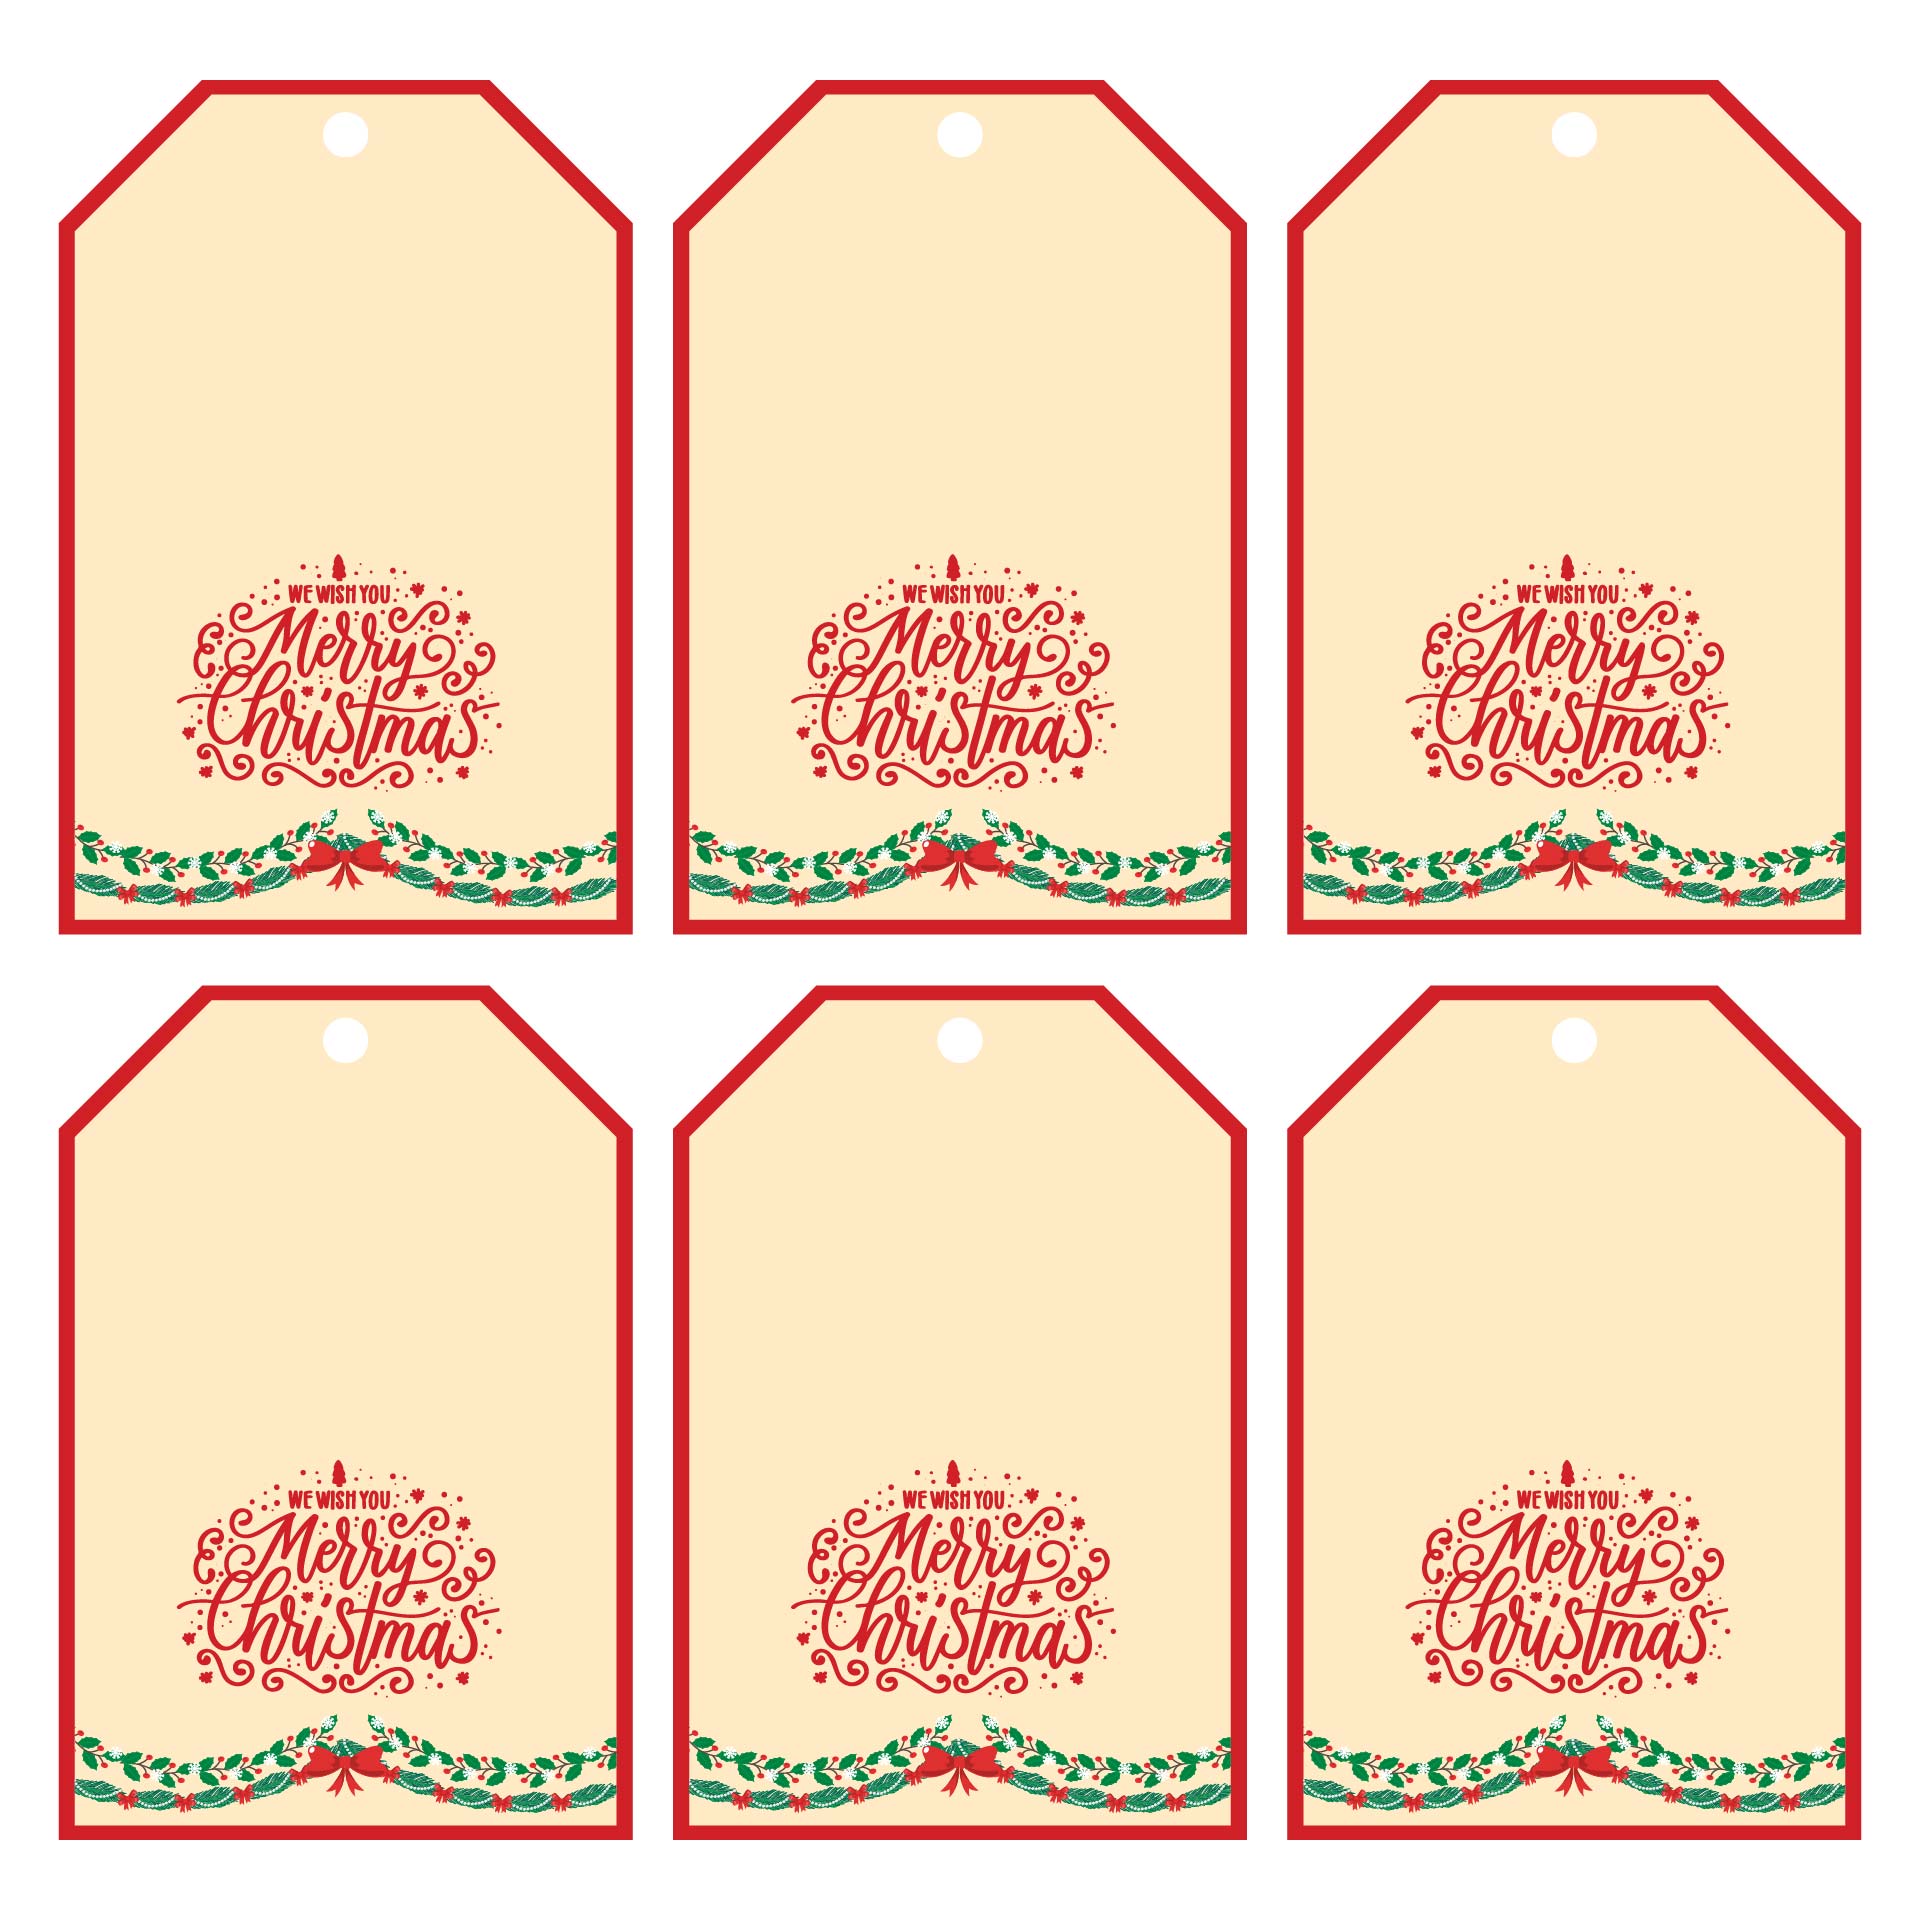 8-best-images-of-free-christmas-printable-label-template-design-free